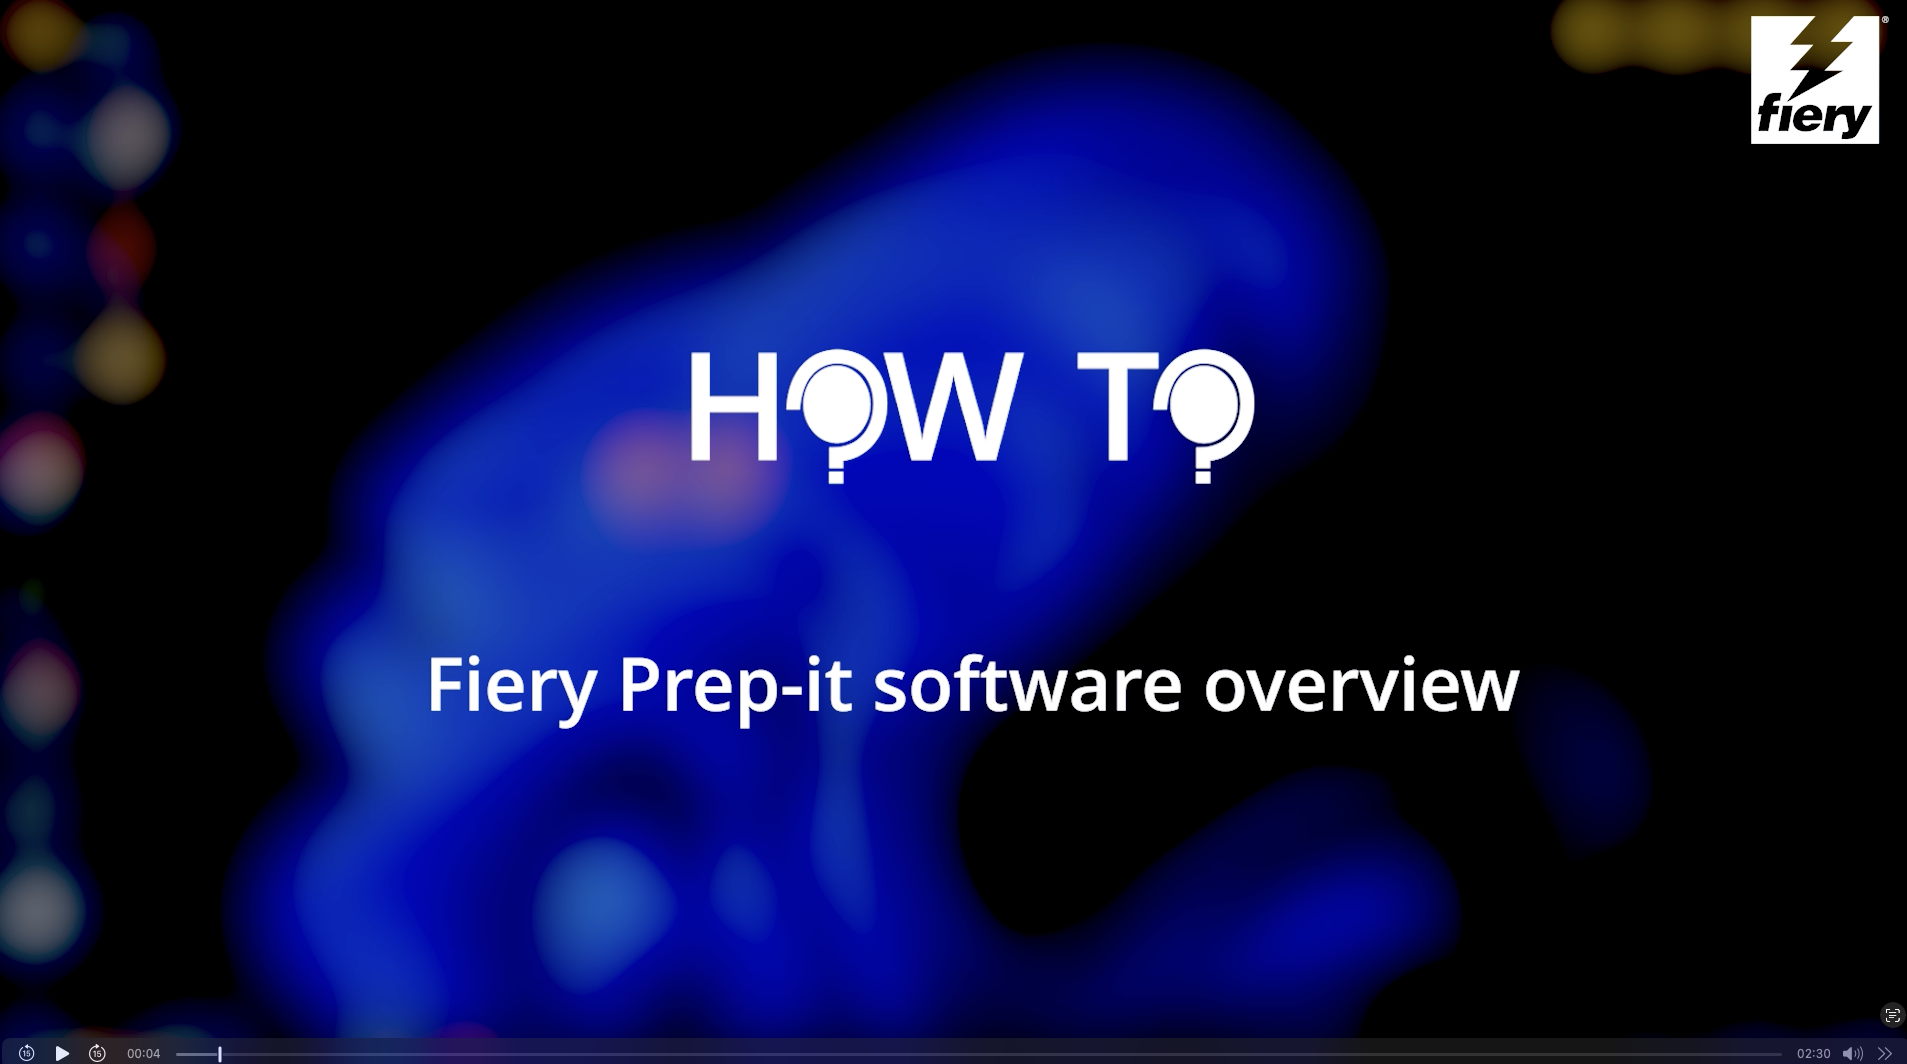 How to - Fiery Prep it software overview